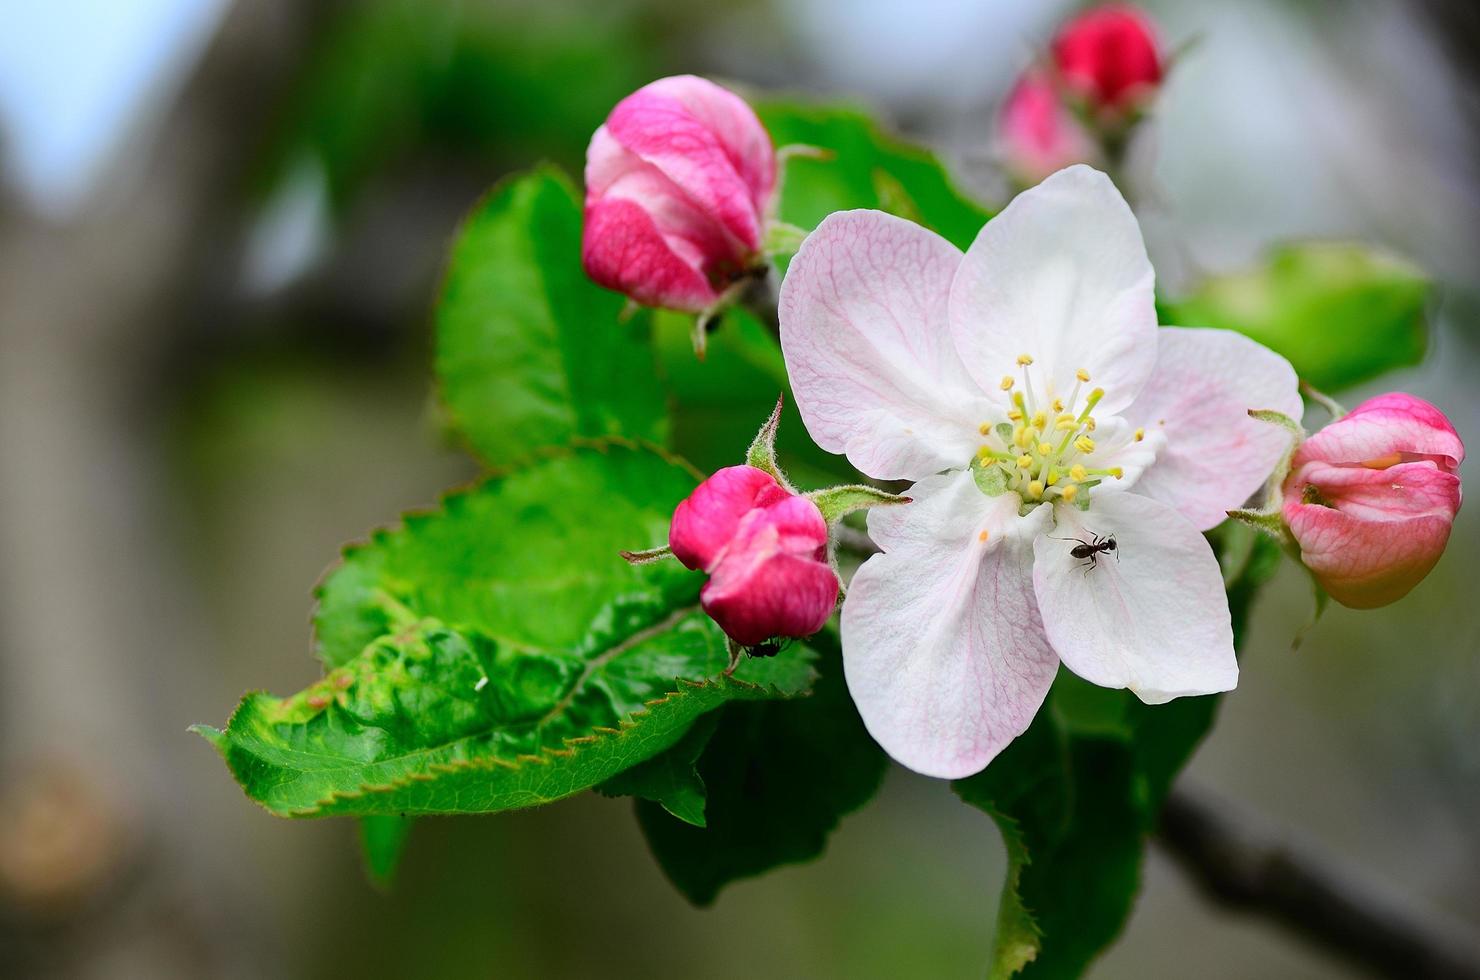 apple blossoms and ants photo